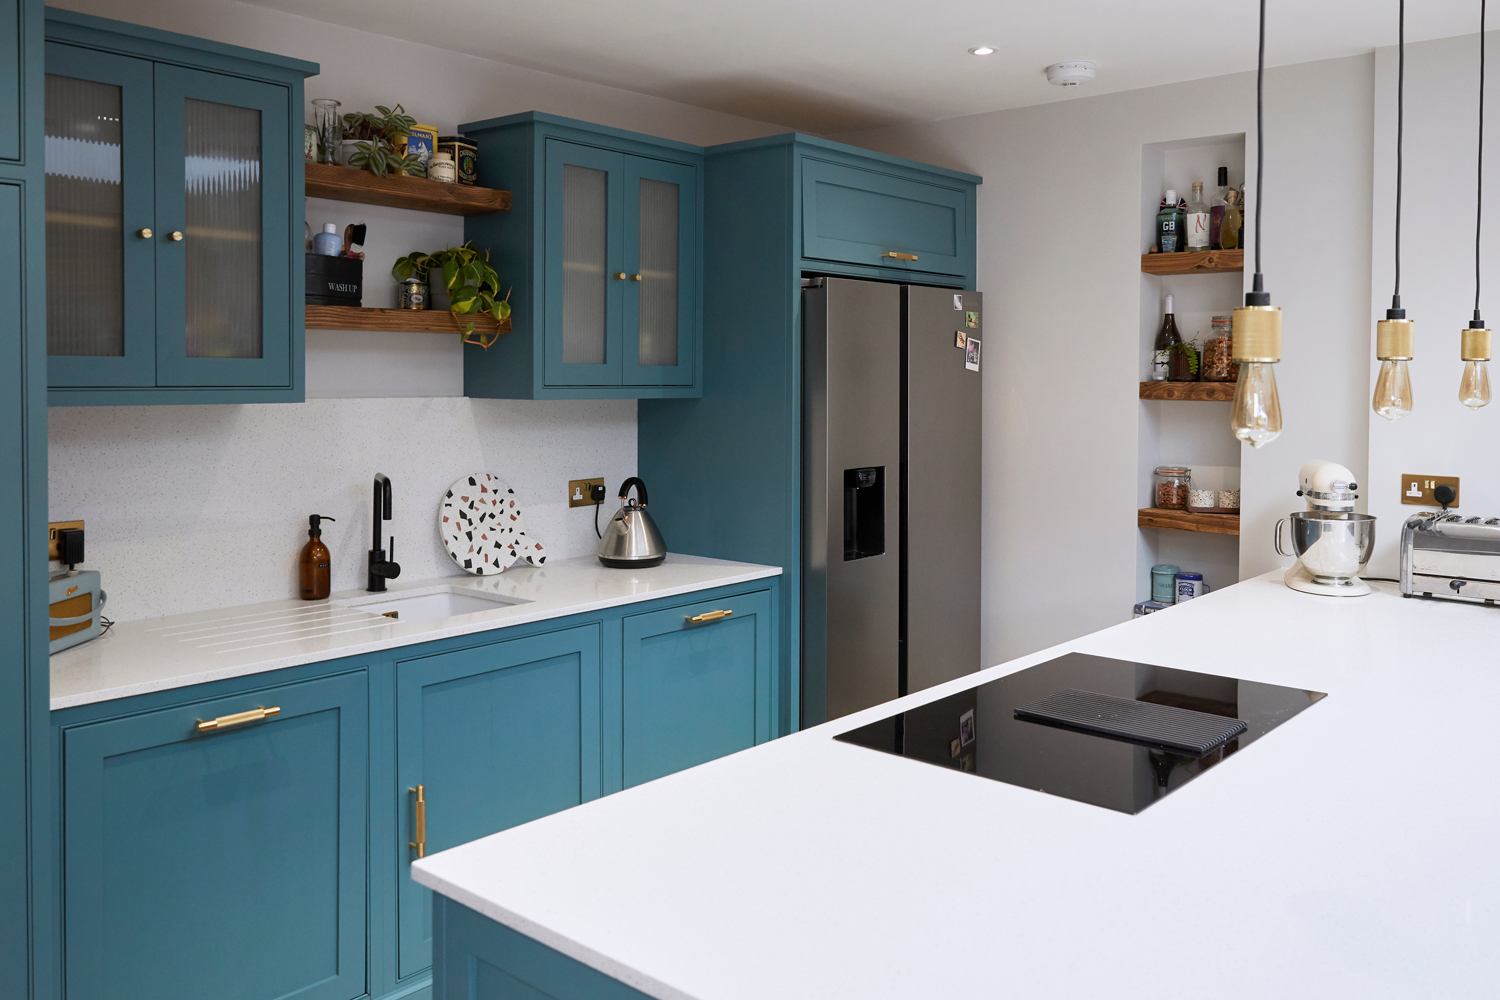 Tea With Florence bespoke kitchen with with quartz worktops and rustic open shelves